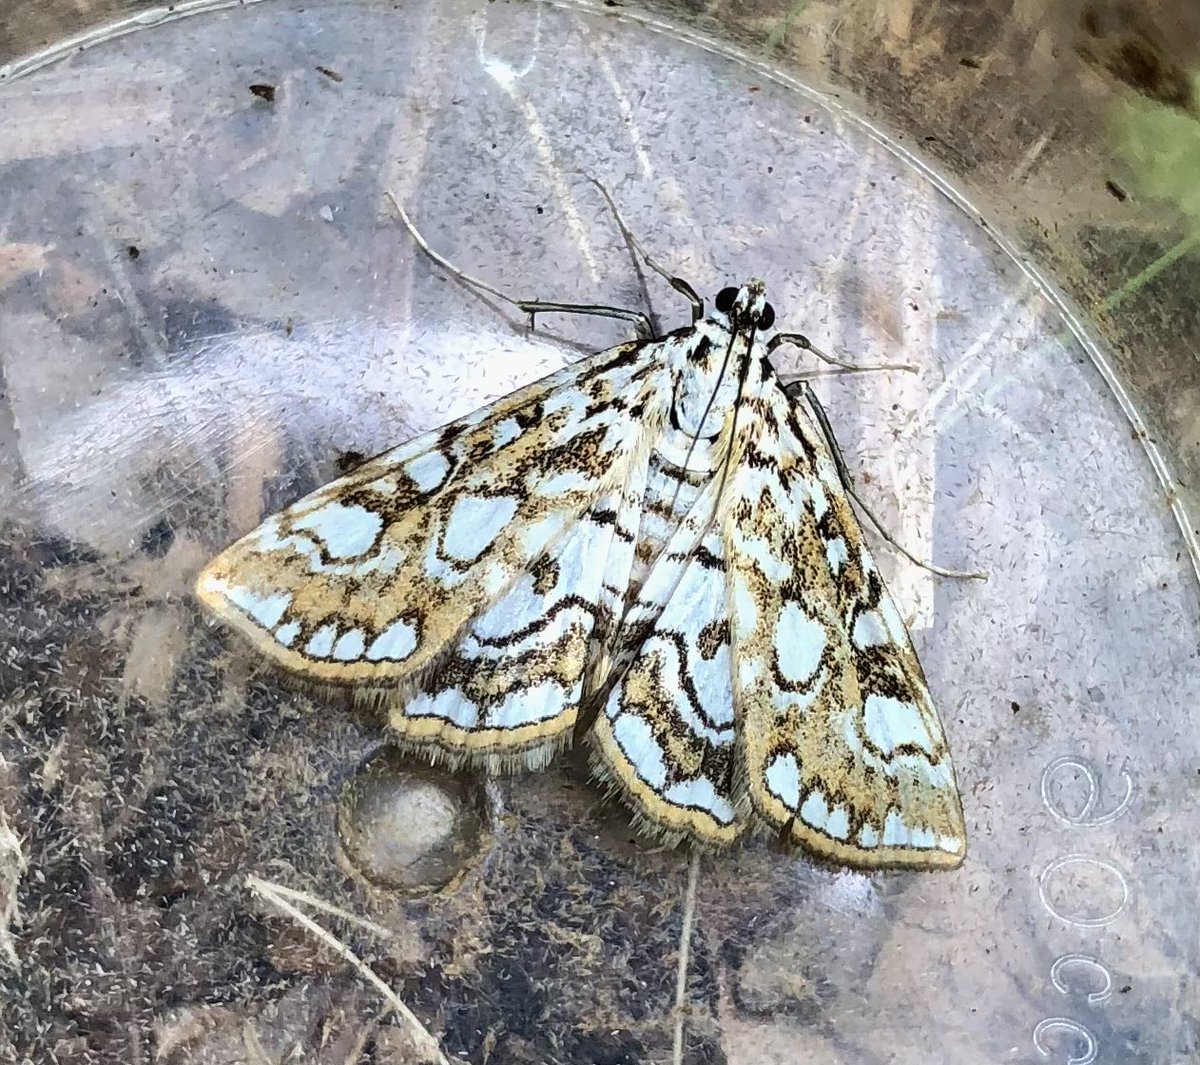 Micro-moth glitz ’n’ glamour✨- Brown China-mark (Elophila nymphaeata) found during the day today, next to a small pond. Its caterpillars are aquatic, feeding on pondweeds etc. These beauties will still be on the wing for #MothNight 8-10 July.